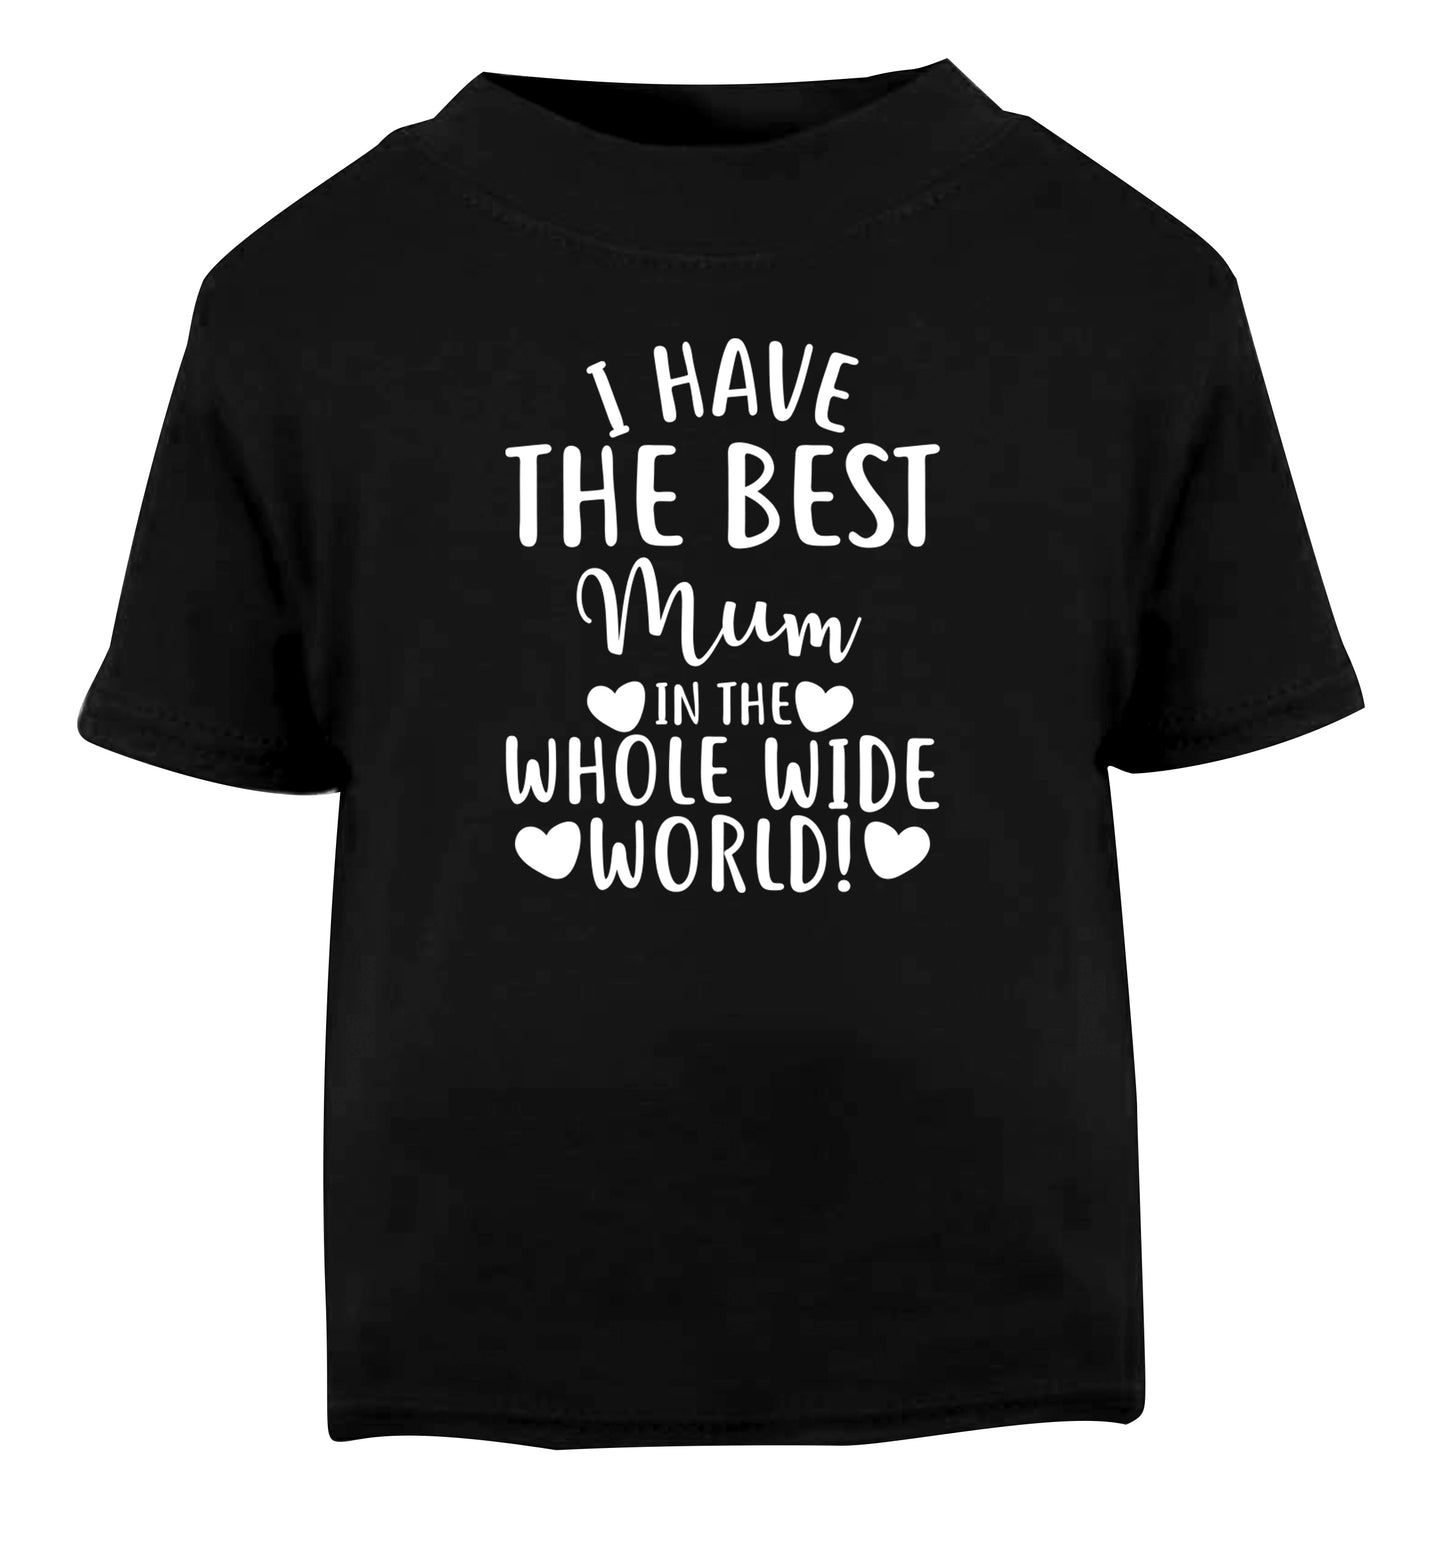 I have the best mum in the whole wide world! Black Baby Toddler Tshirt 2 years